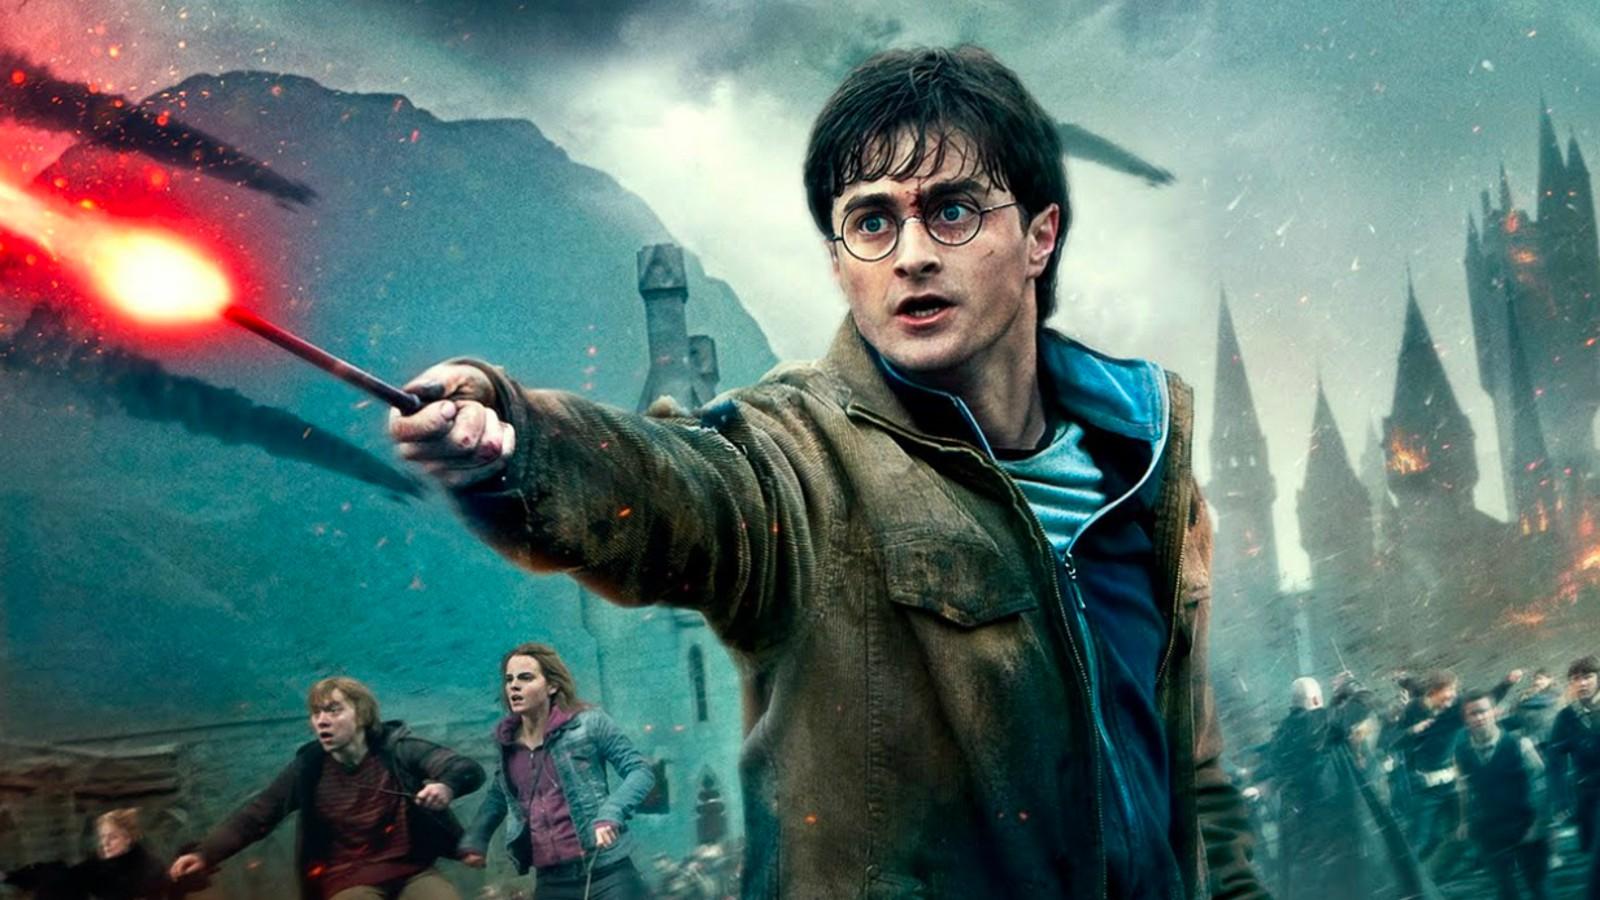 Are the Harry Potter movies available on VOD platforms? 2